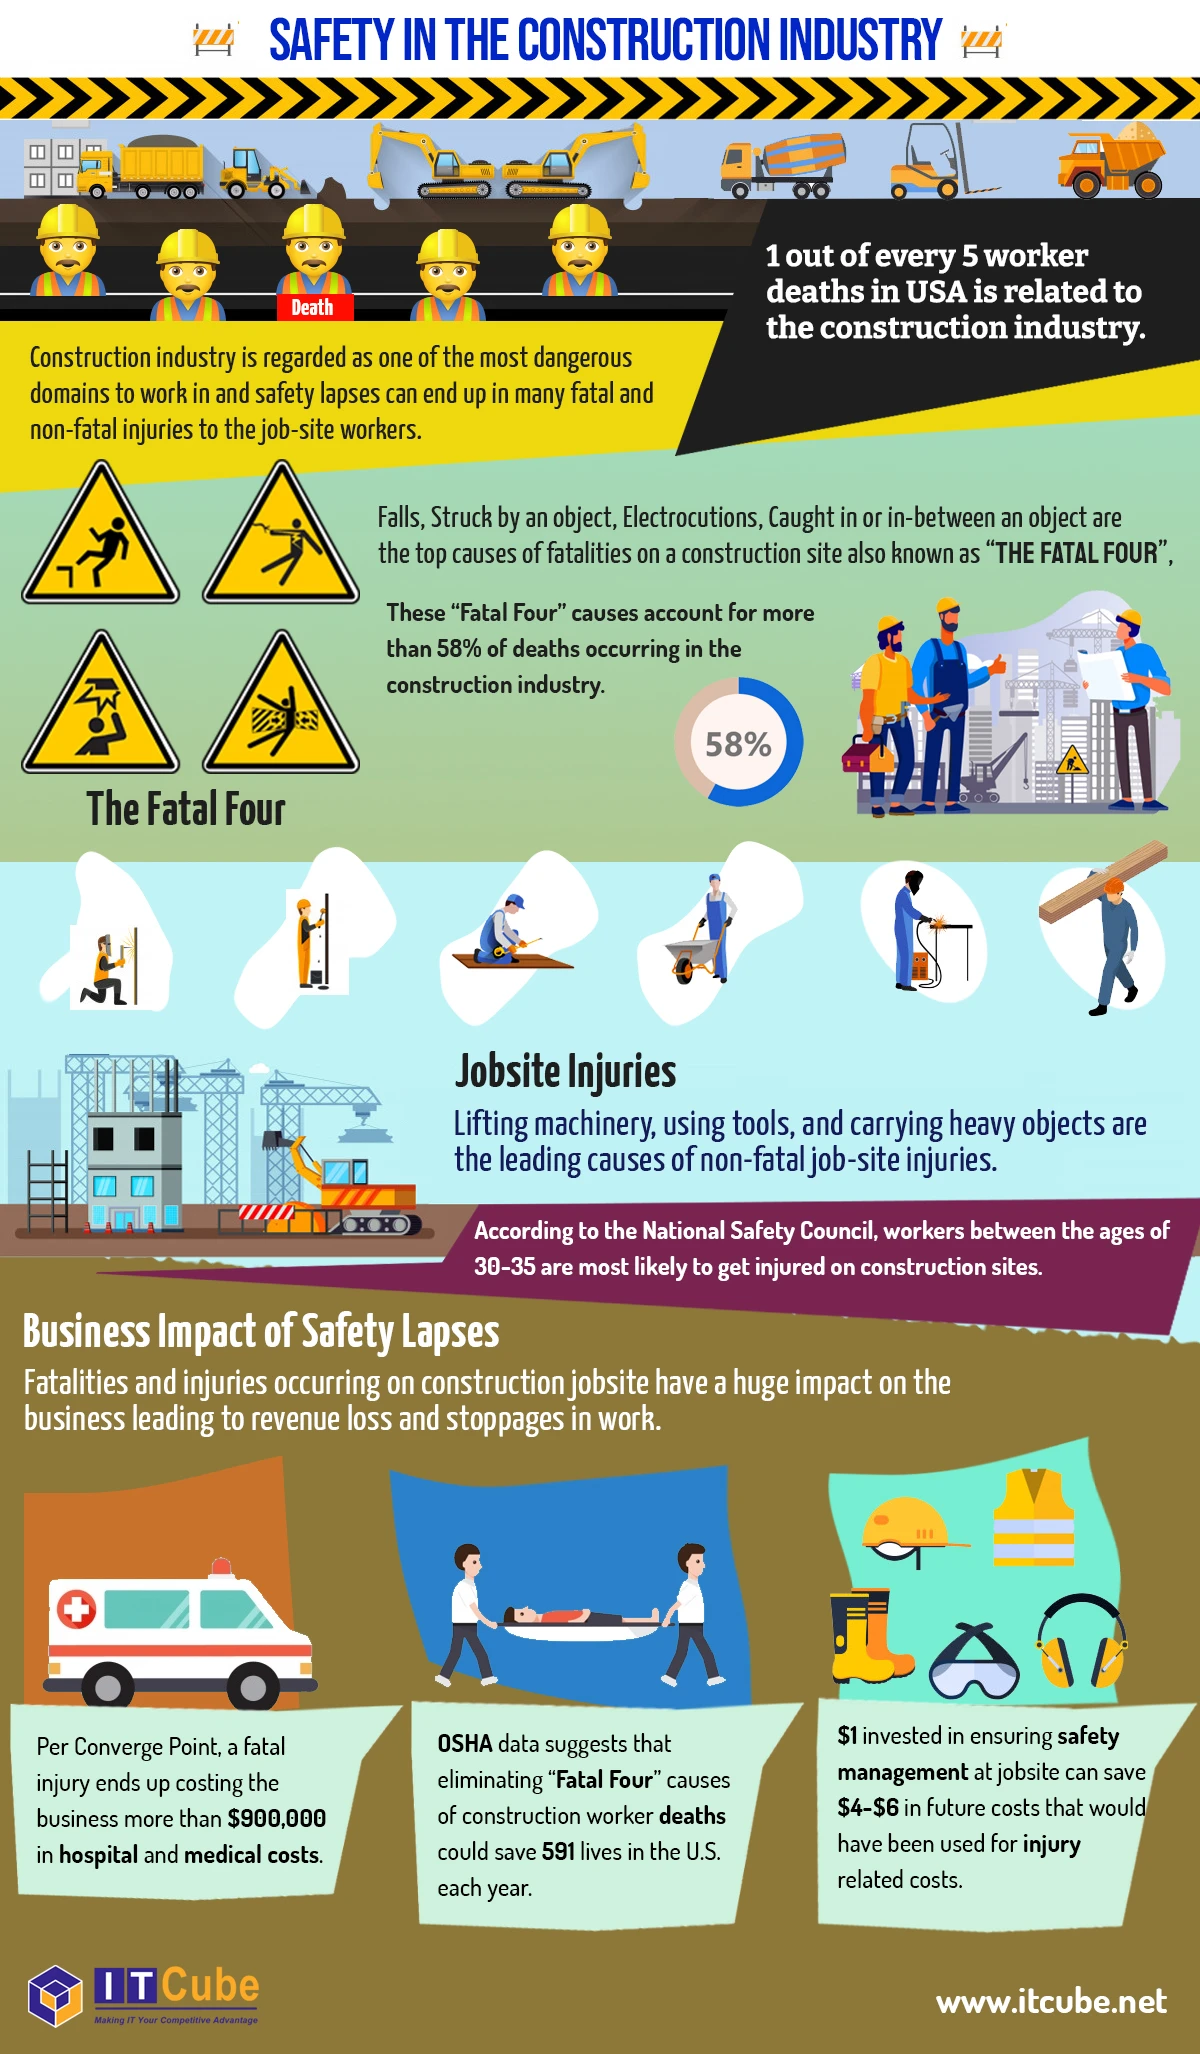 safety-in-the-construction-industry-by-itcube Image